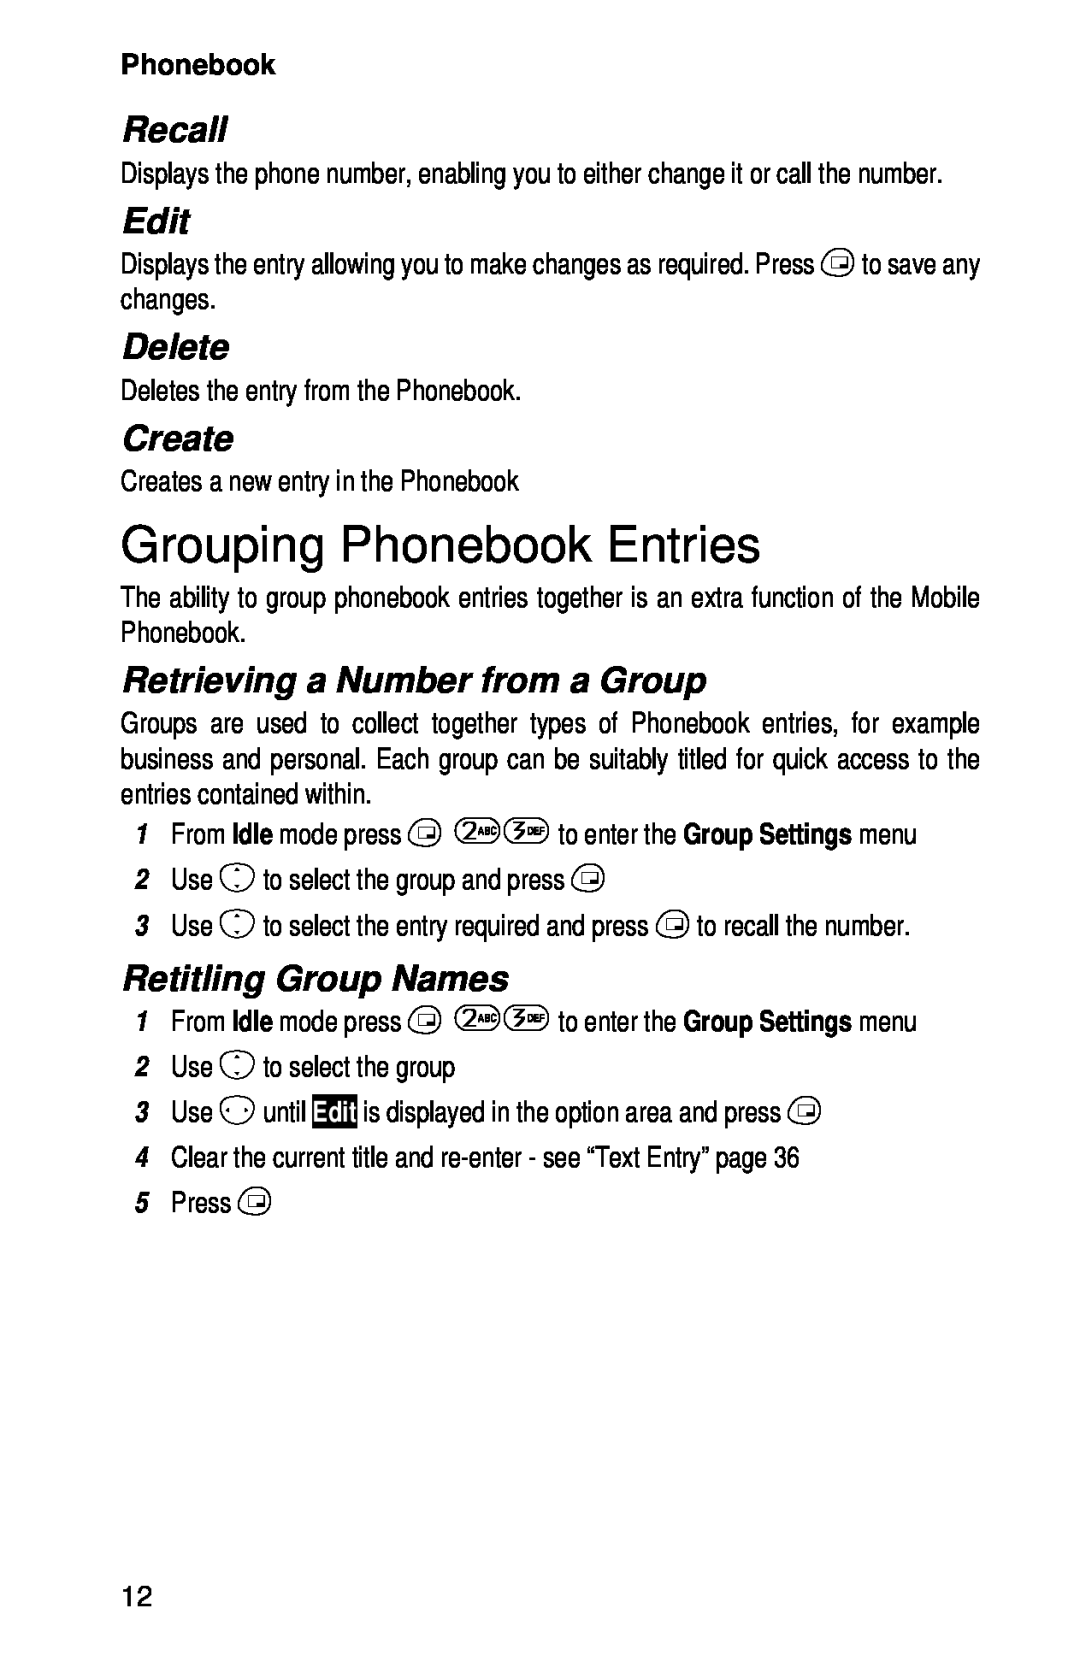 Panasonic EB-GD52 Grouping Phonebook Entries, Recall, Edit, Delete, Create, Retrieving a Number from a Group 